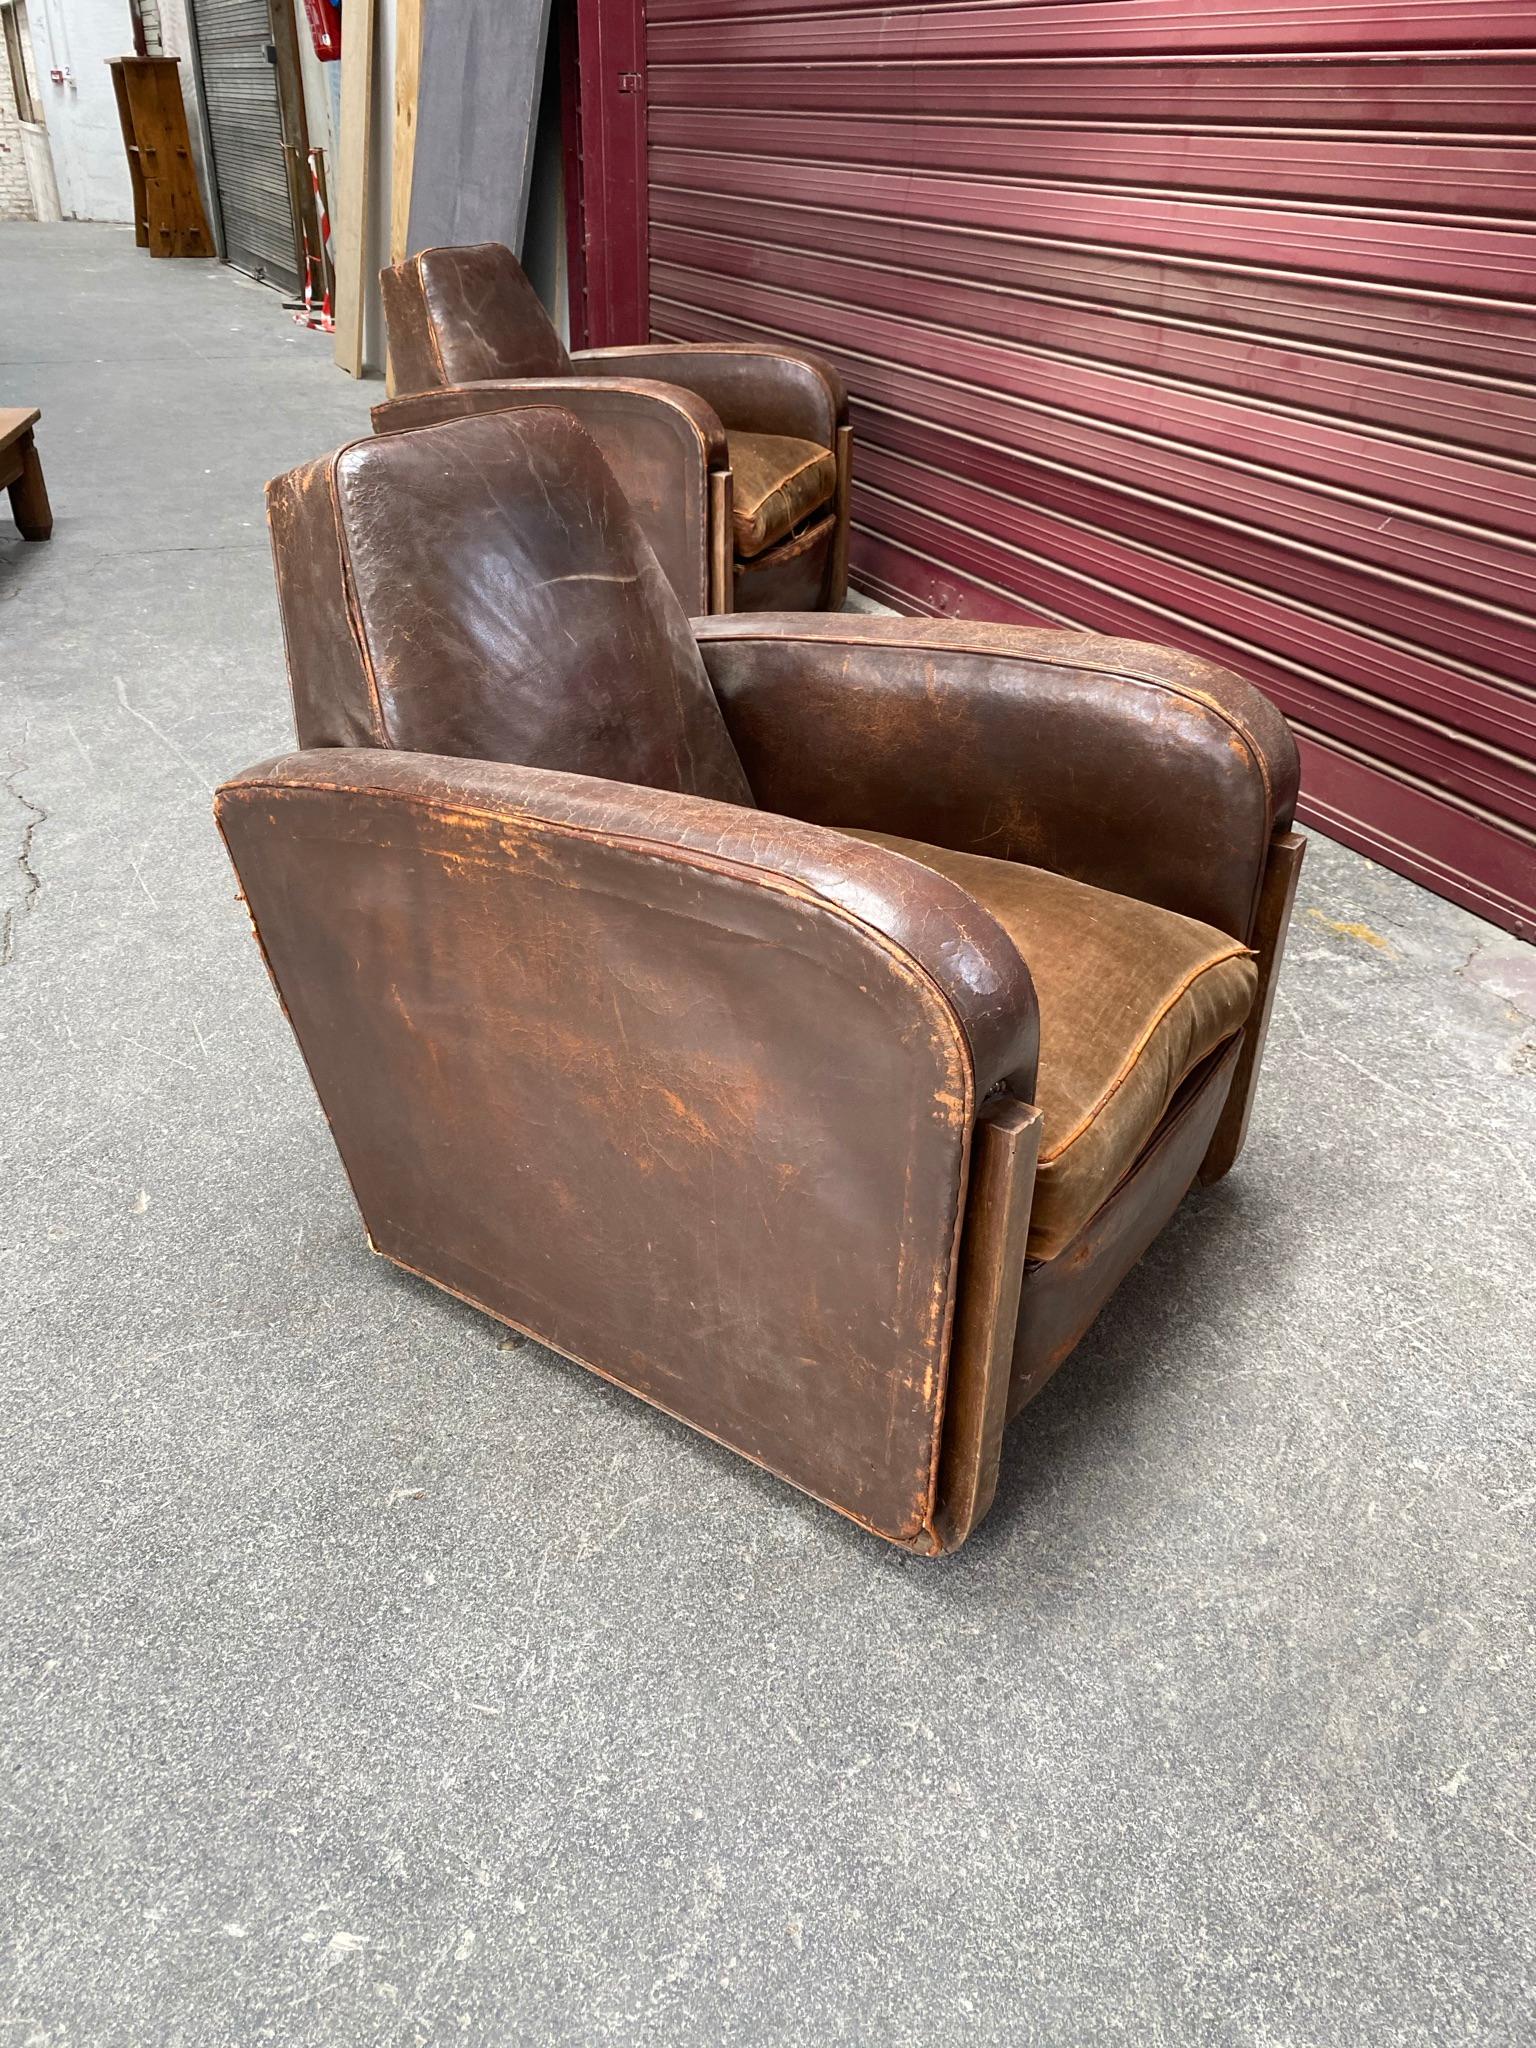 Two Large Elegant Art Deco Armchairs Covered in Leather, Sled Base, circa 1930 For Sale 6